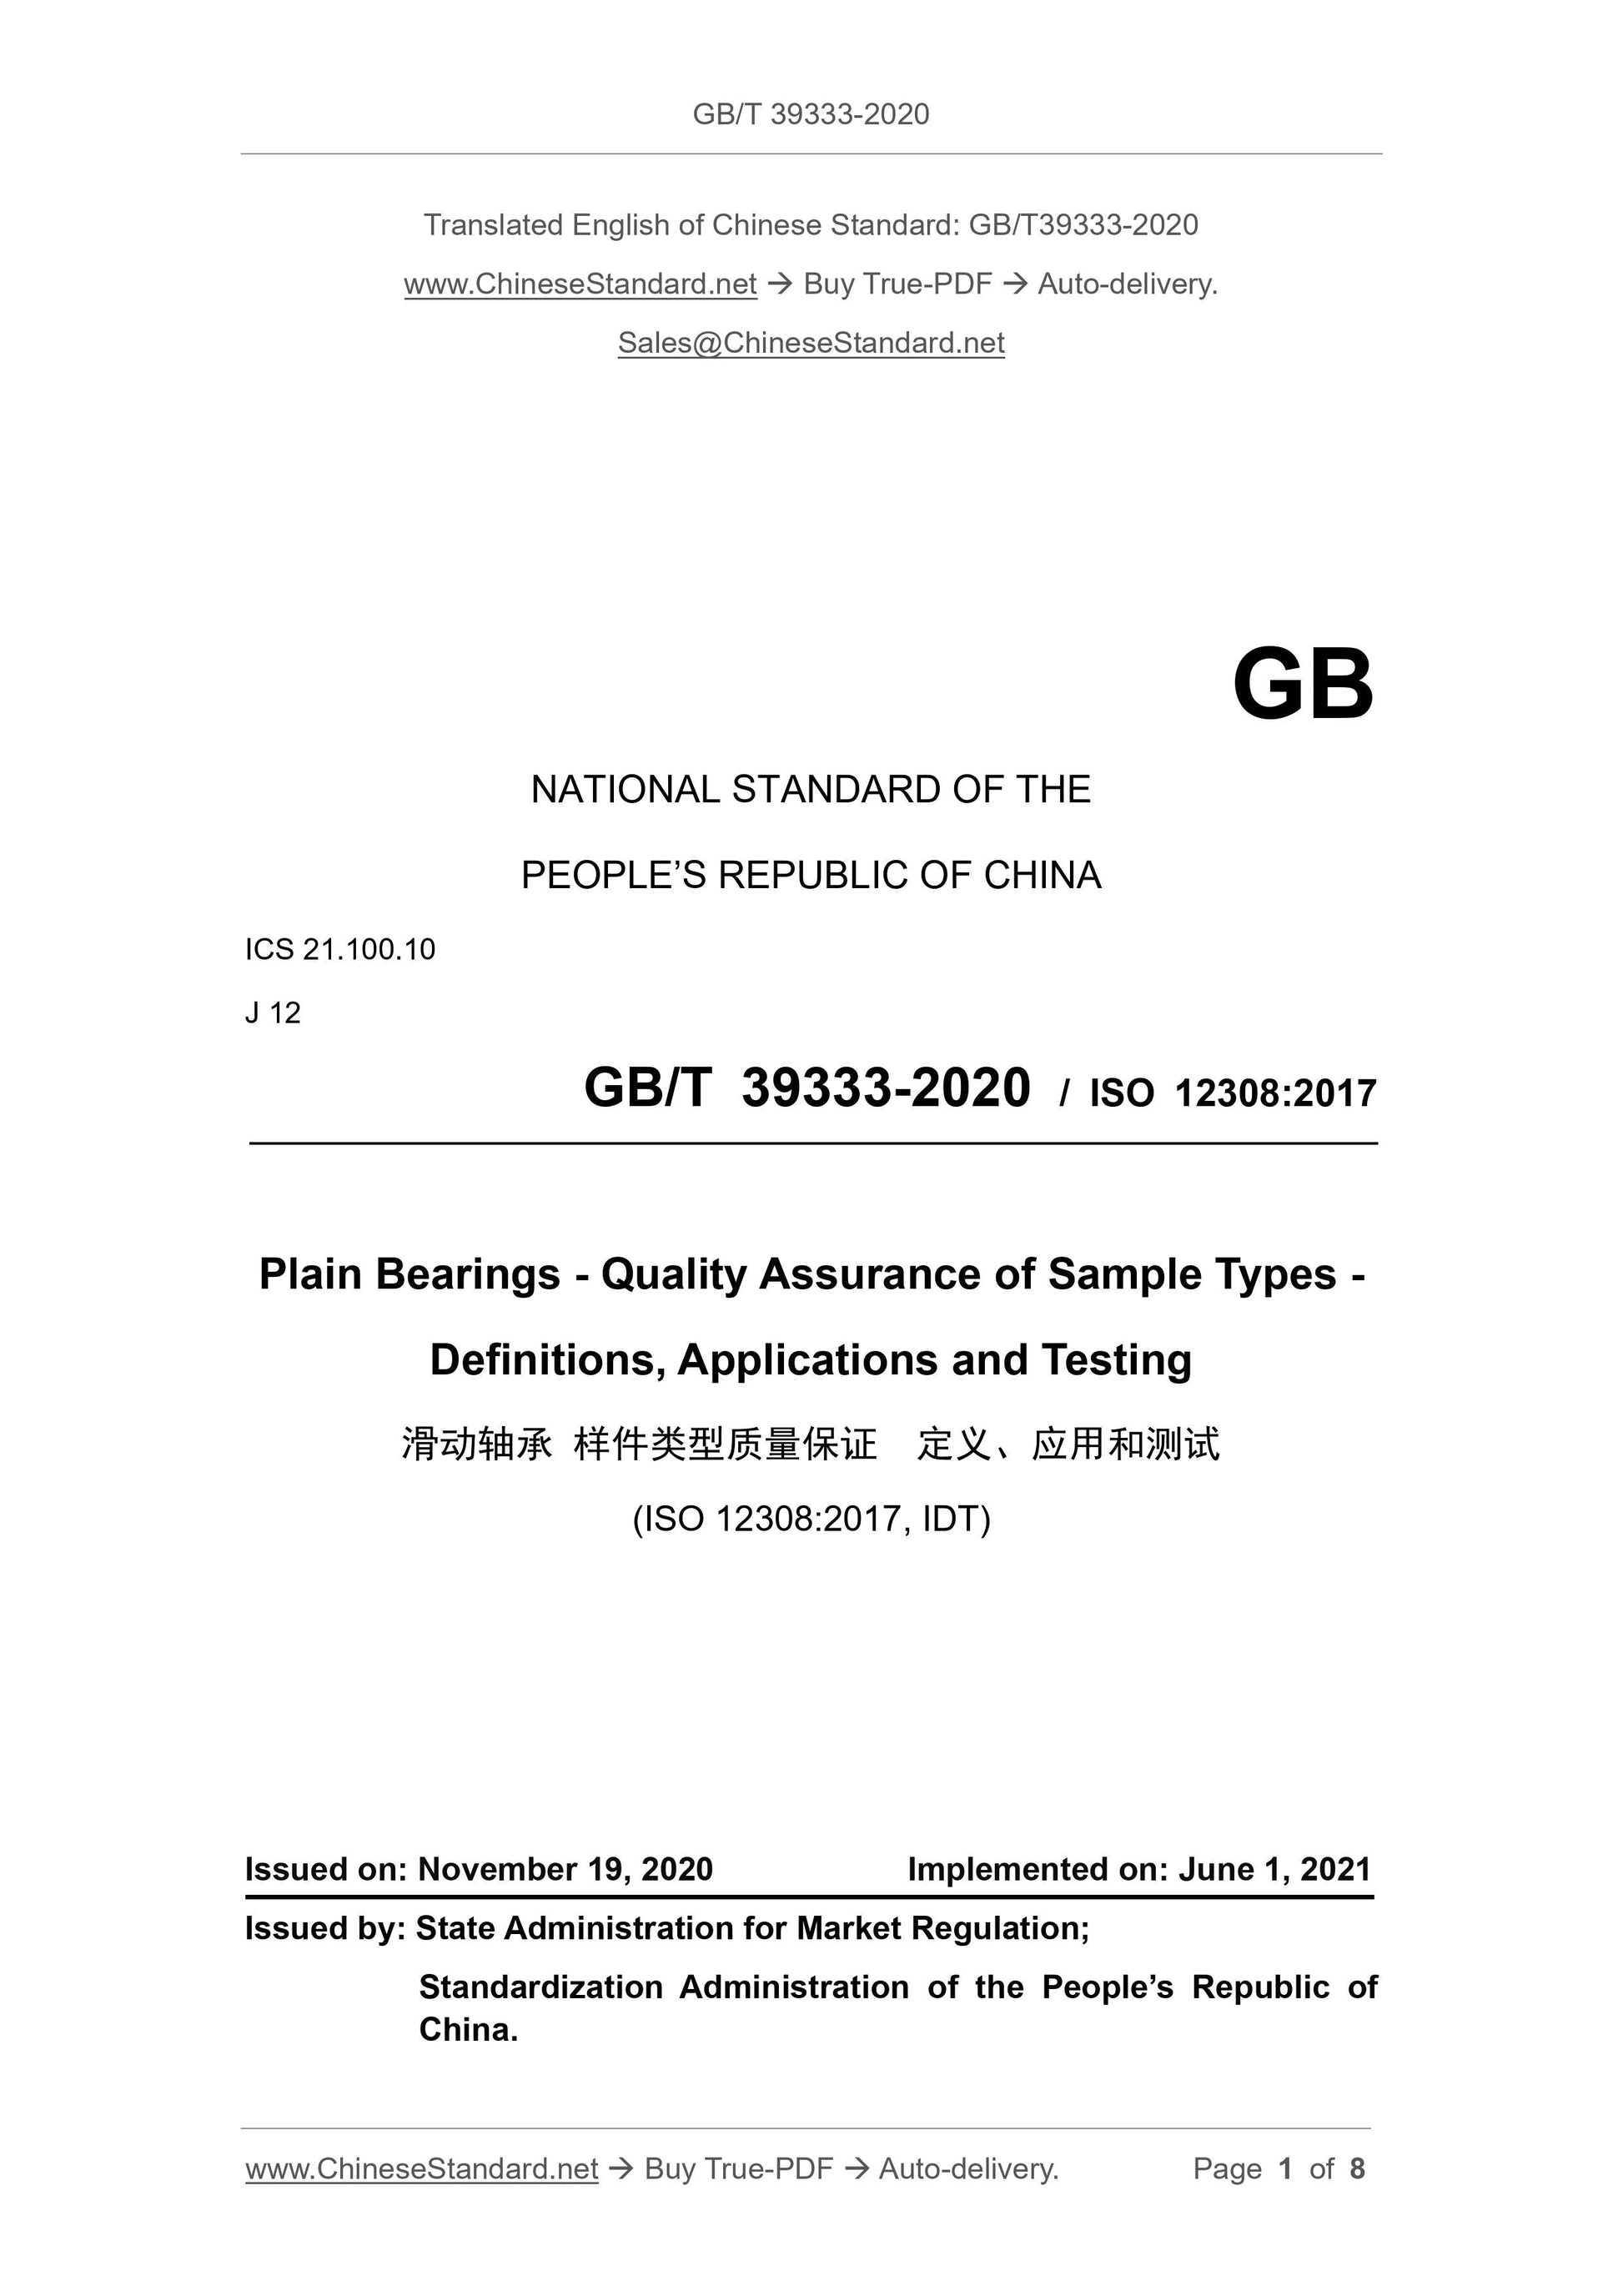 GB/T 39333-2020 Page 1